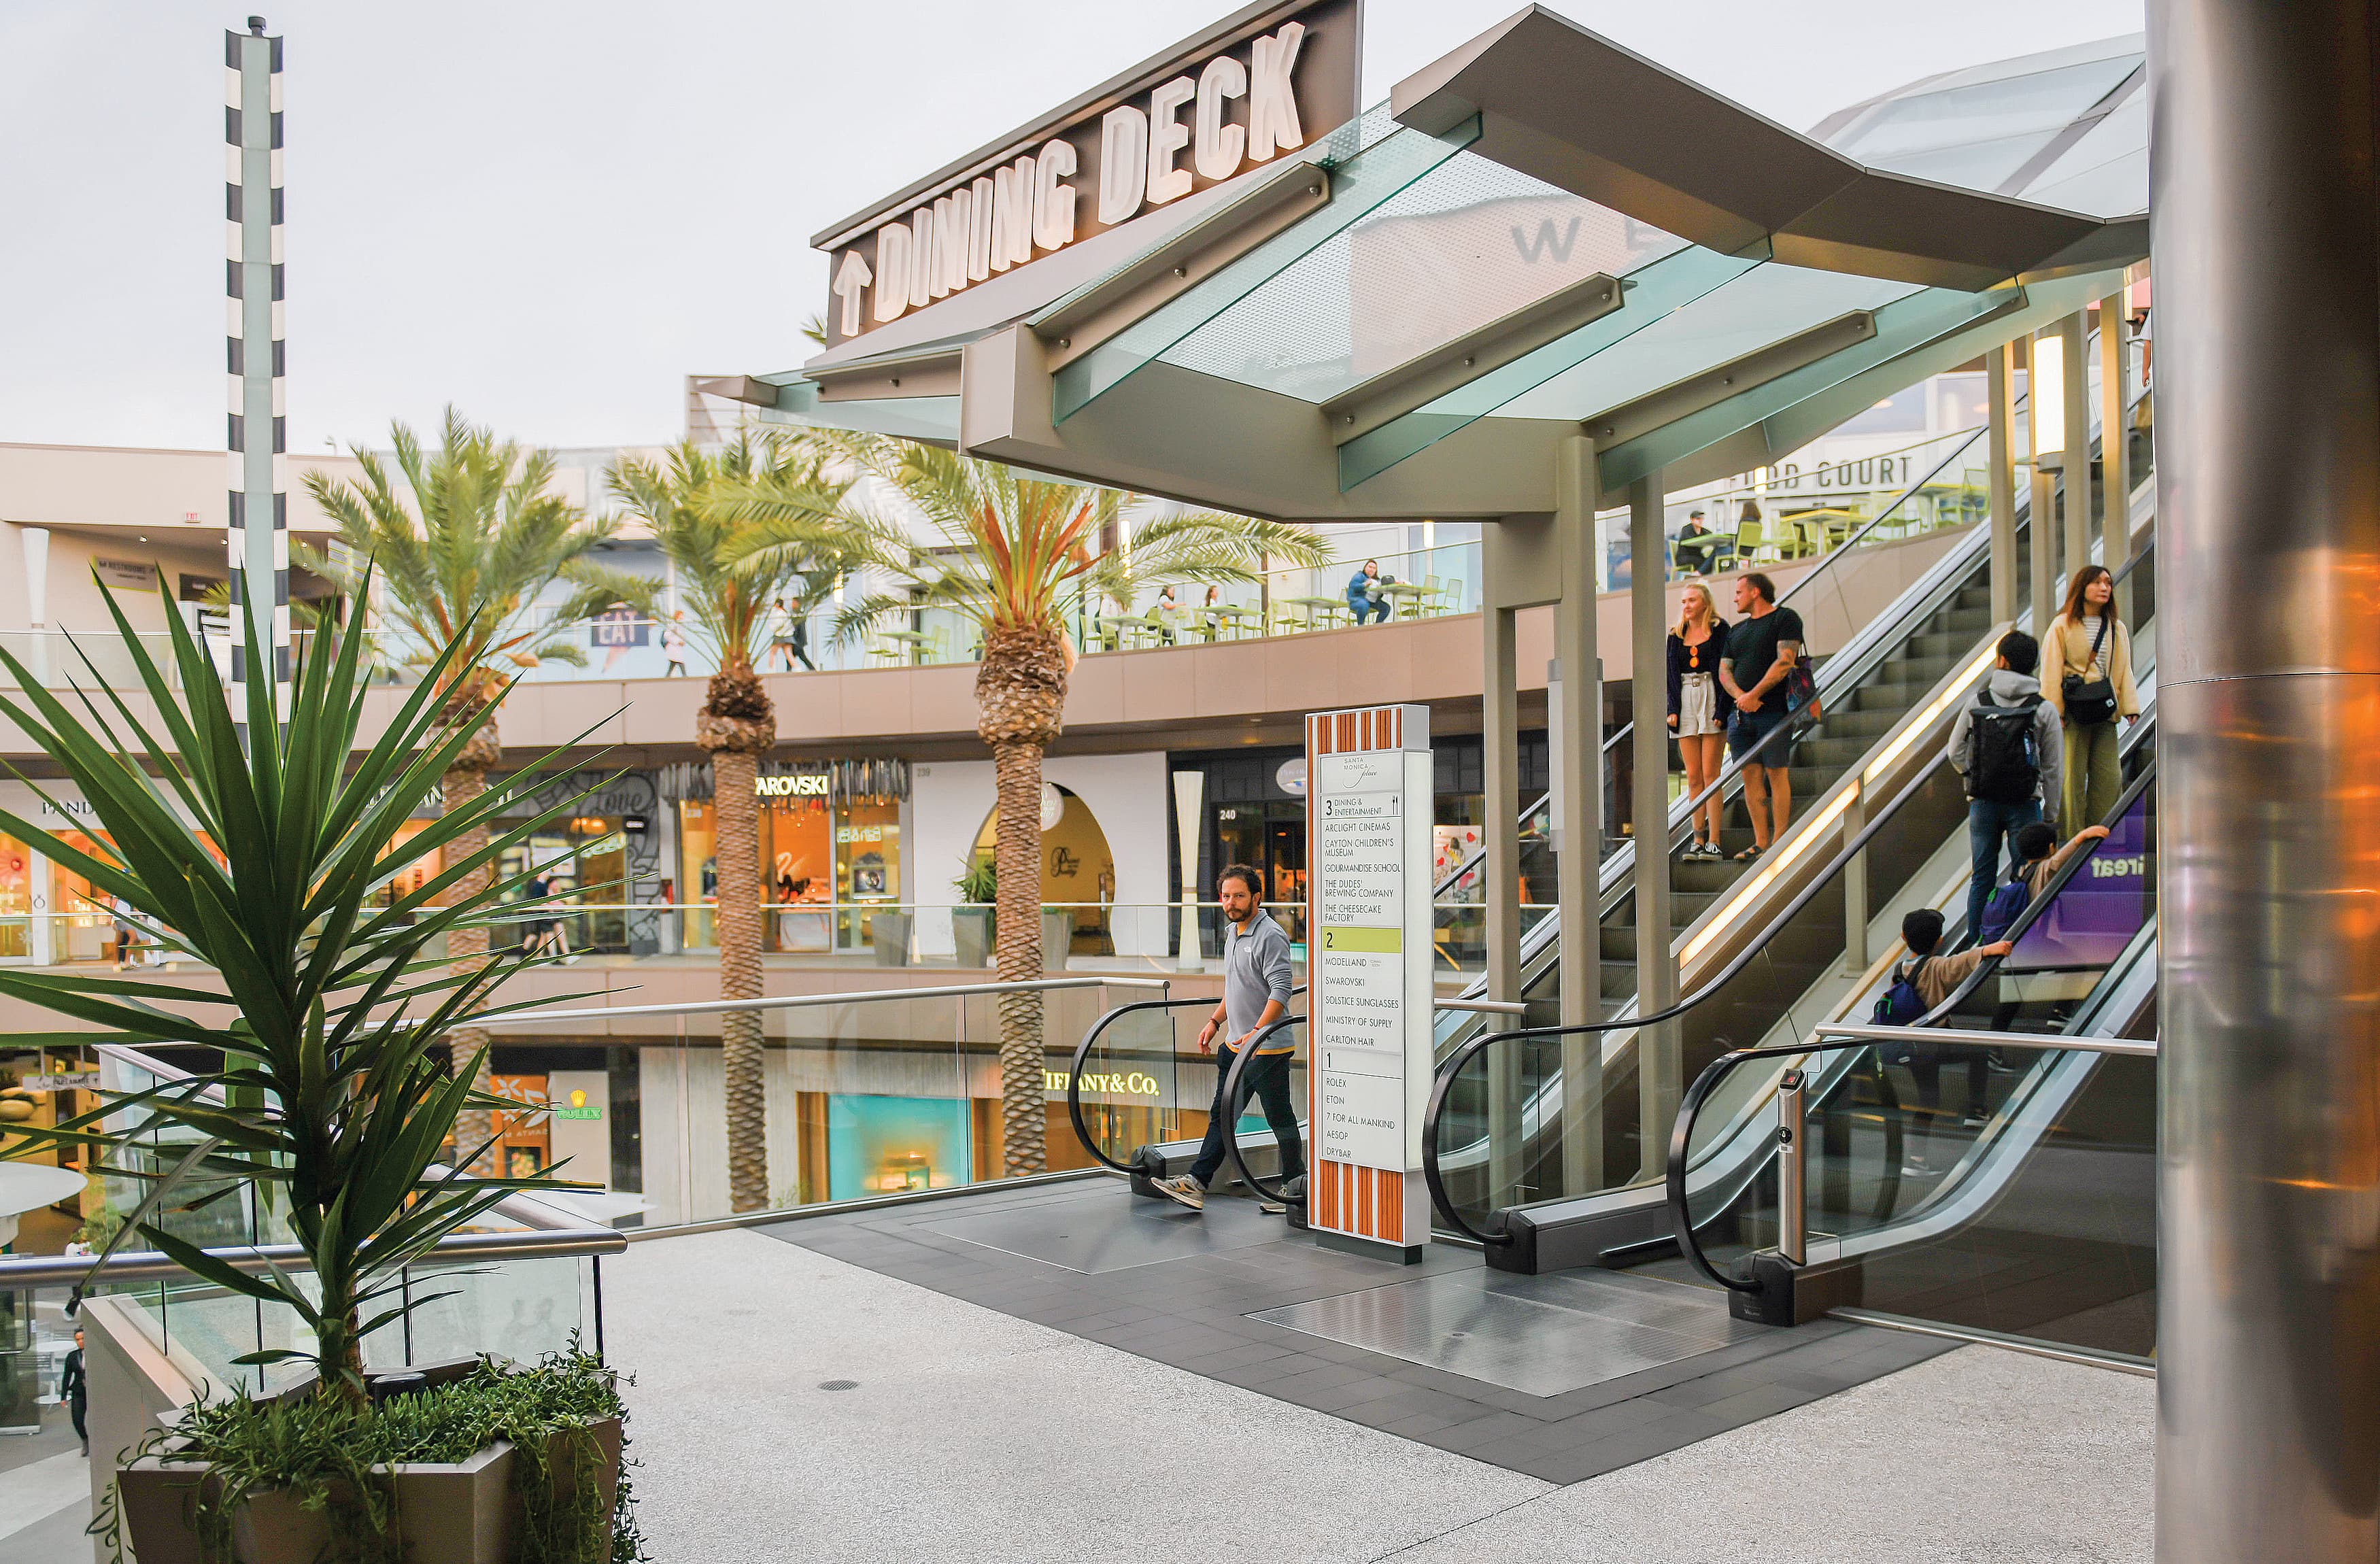 The Cheesecake Factory Restaurant in Santa Monica Place Mall